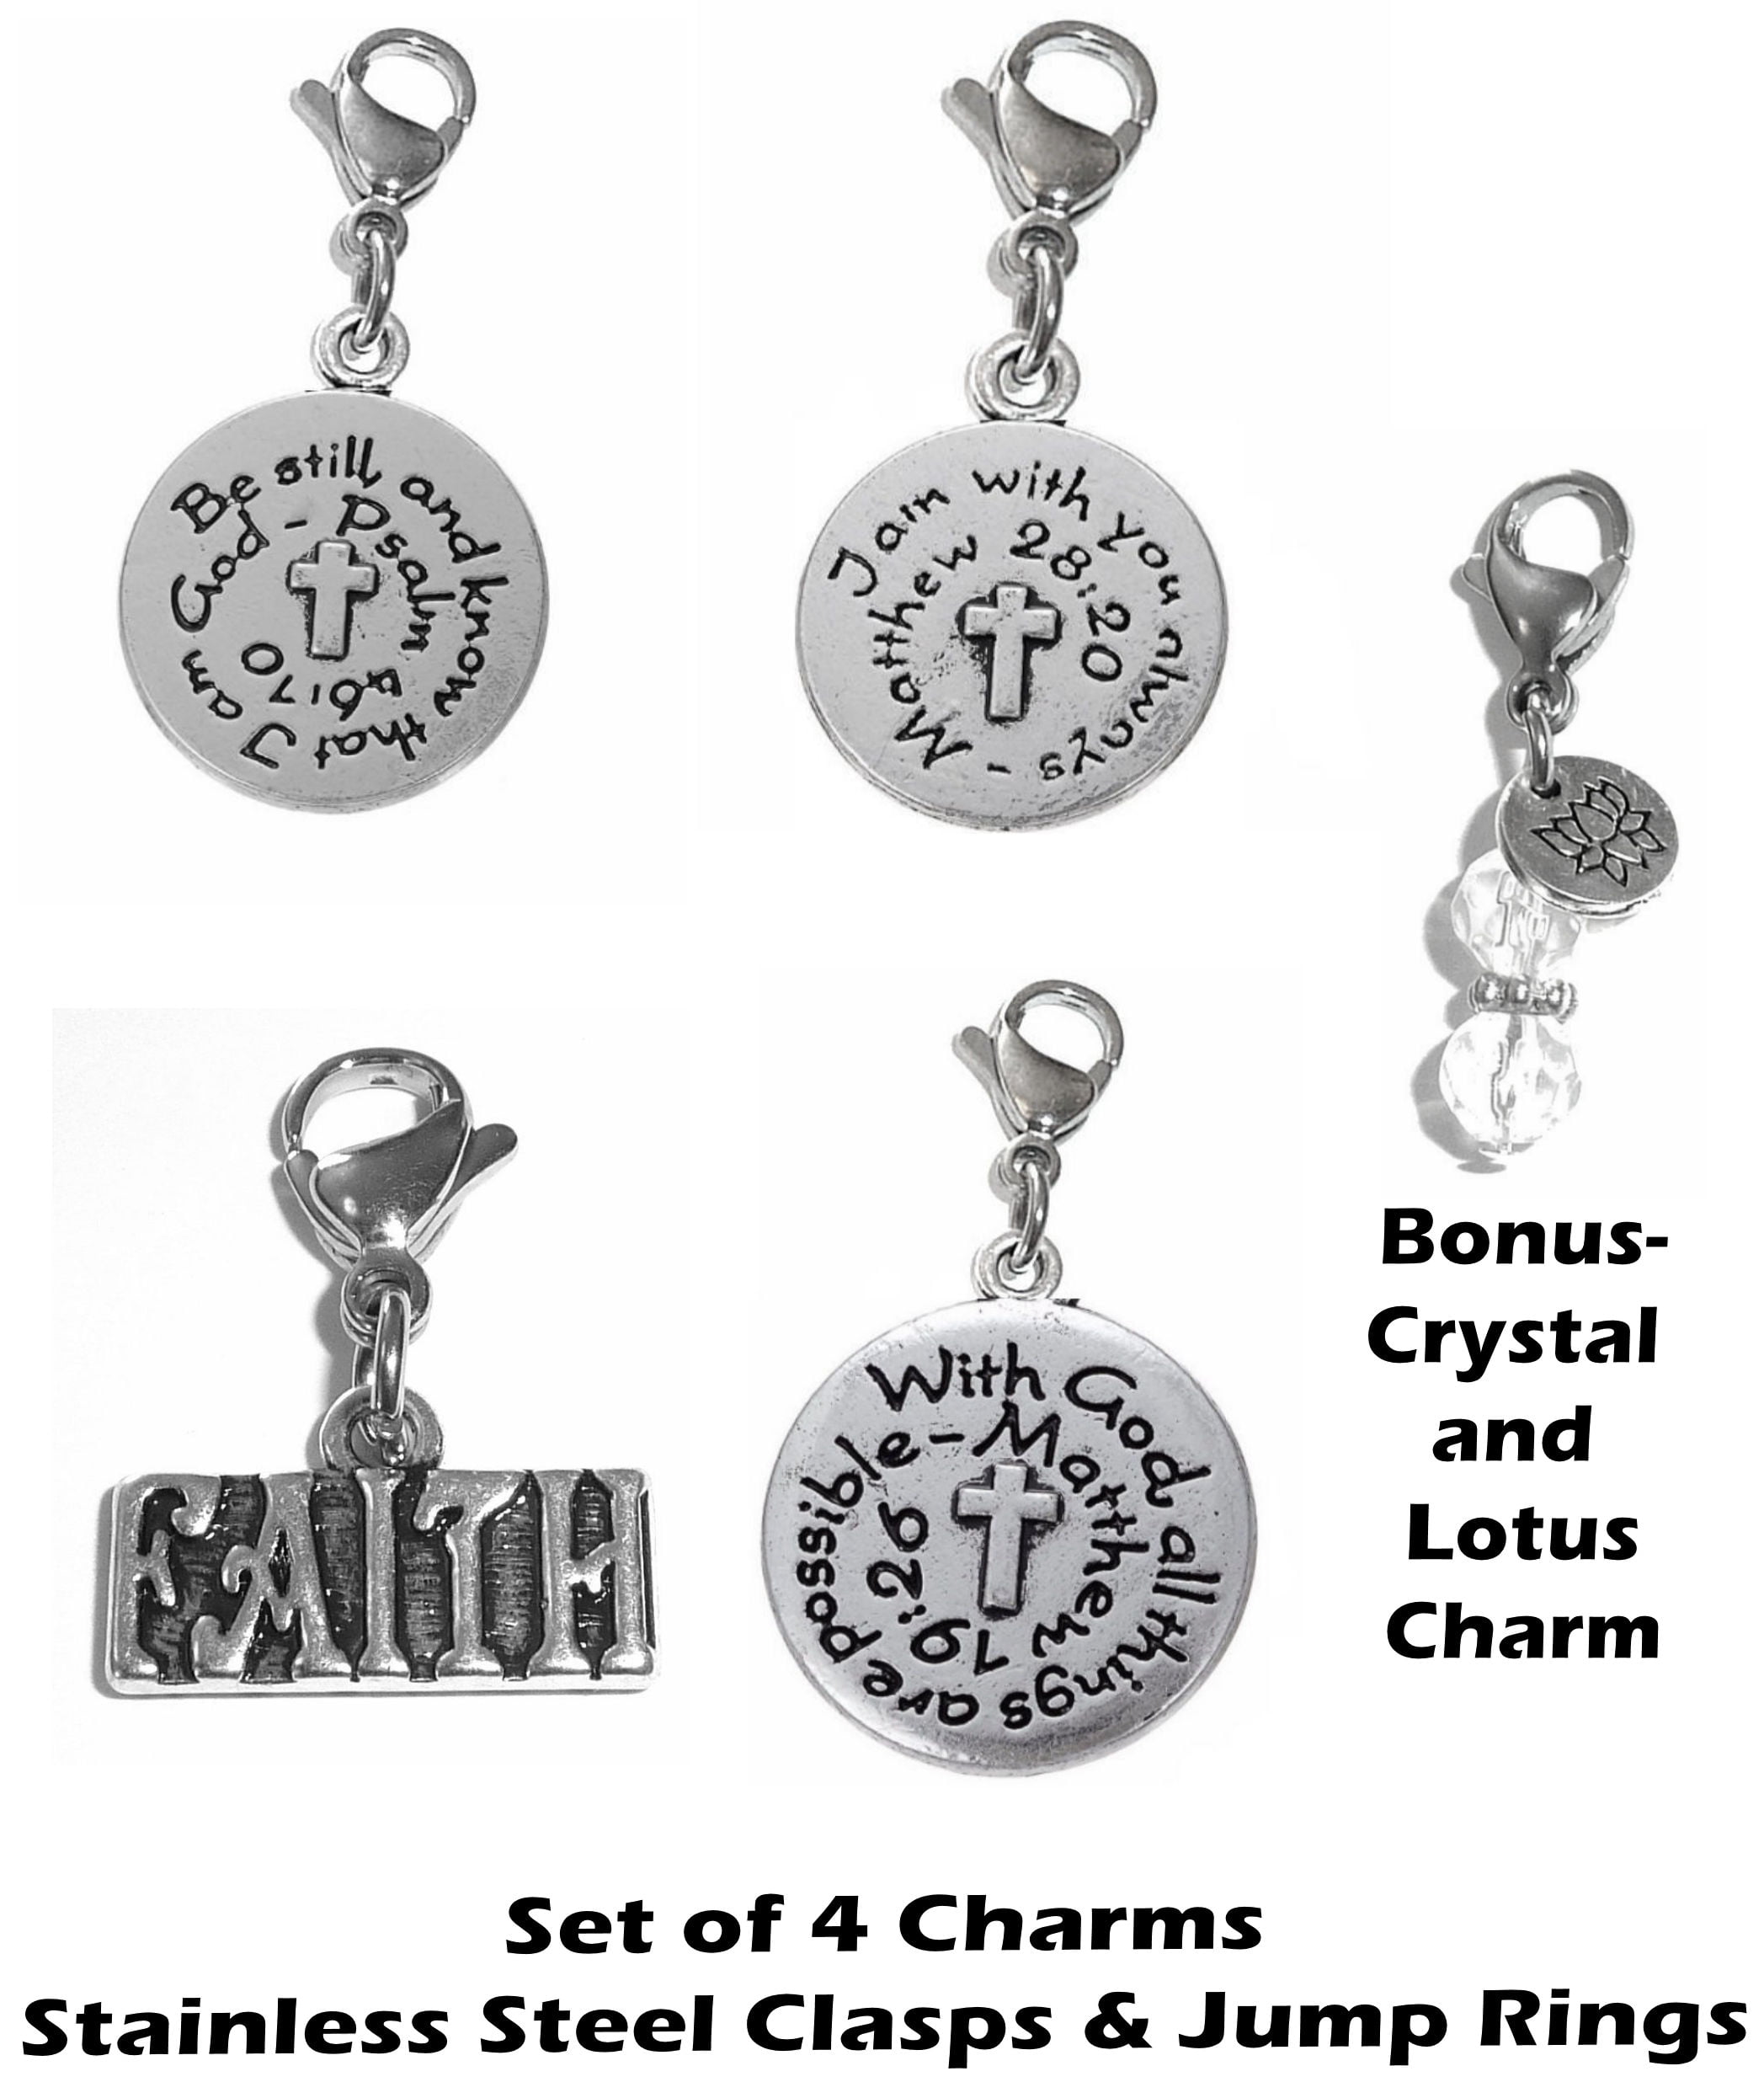 Zipper Pull Charm Keychain and Earrings Clip on Charm Keychain Charm,Zipper Pull Lotus Charm Perfect for Necklaces Bracelets